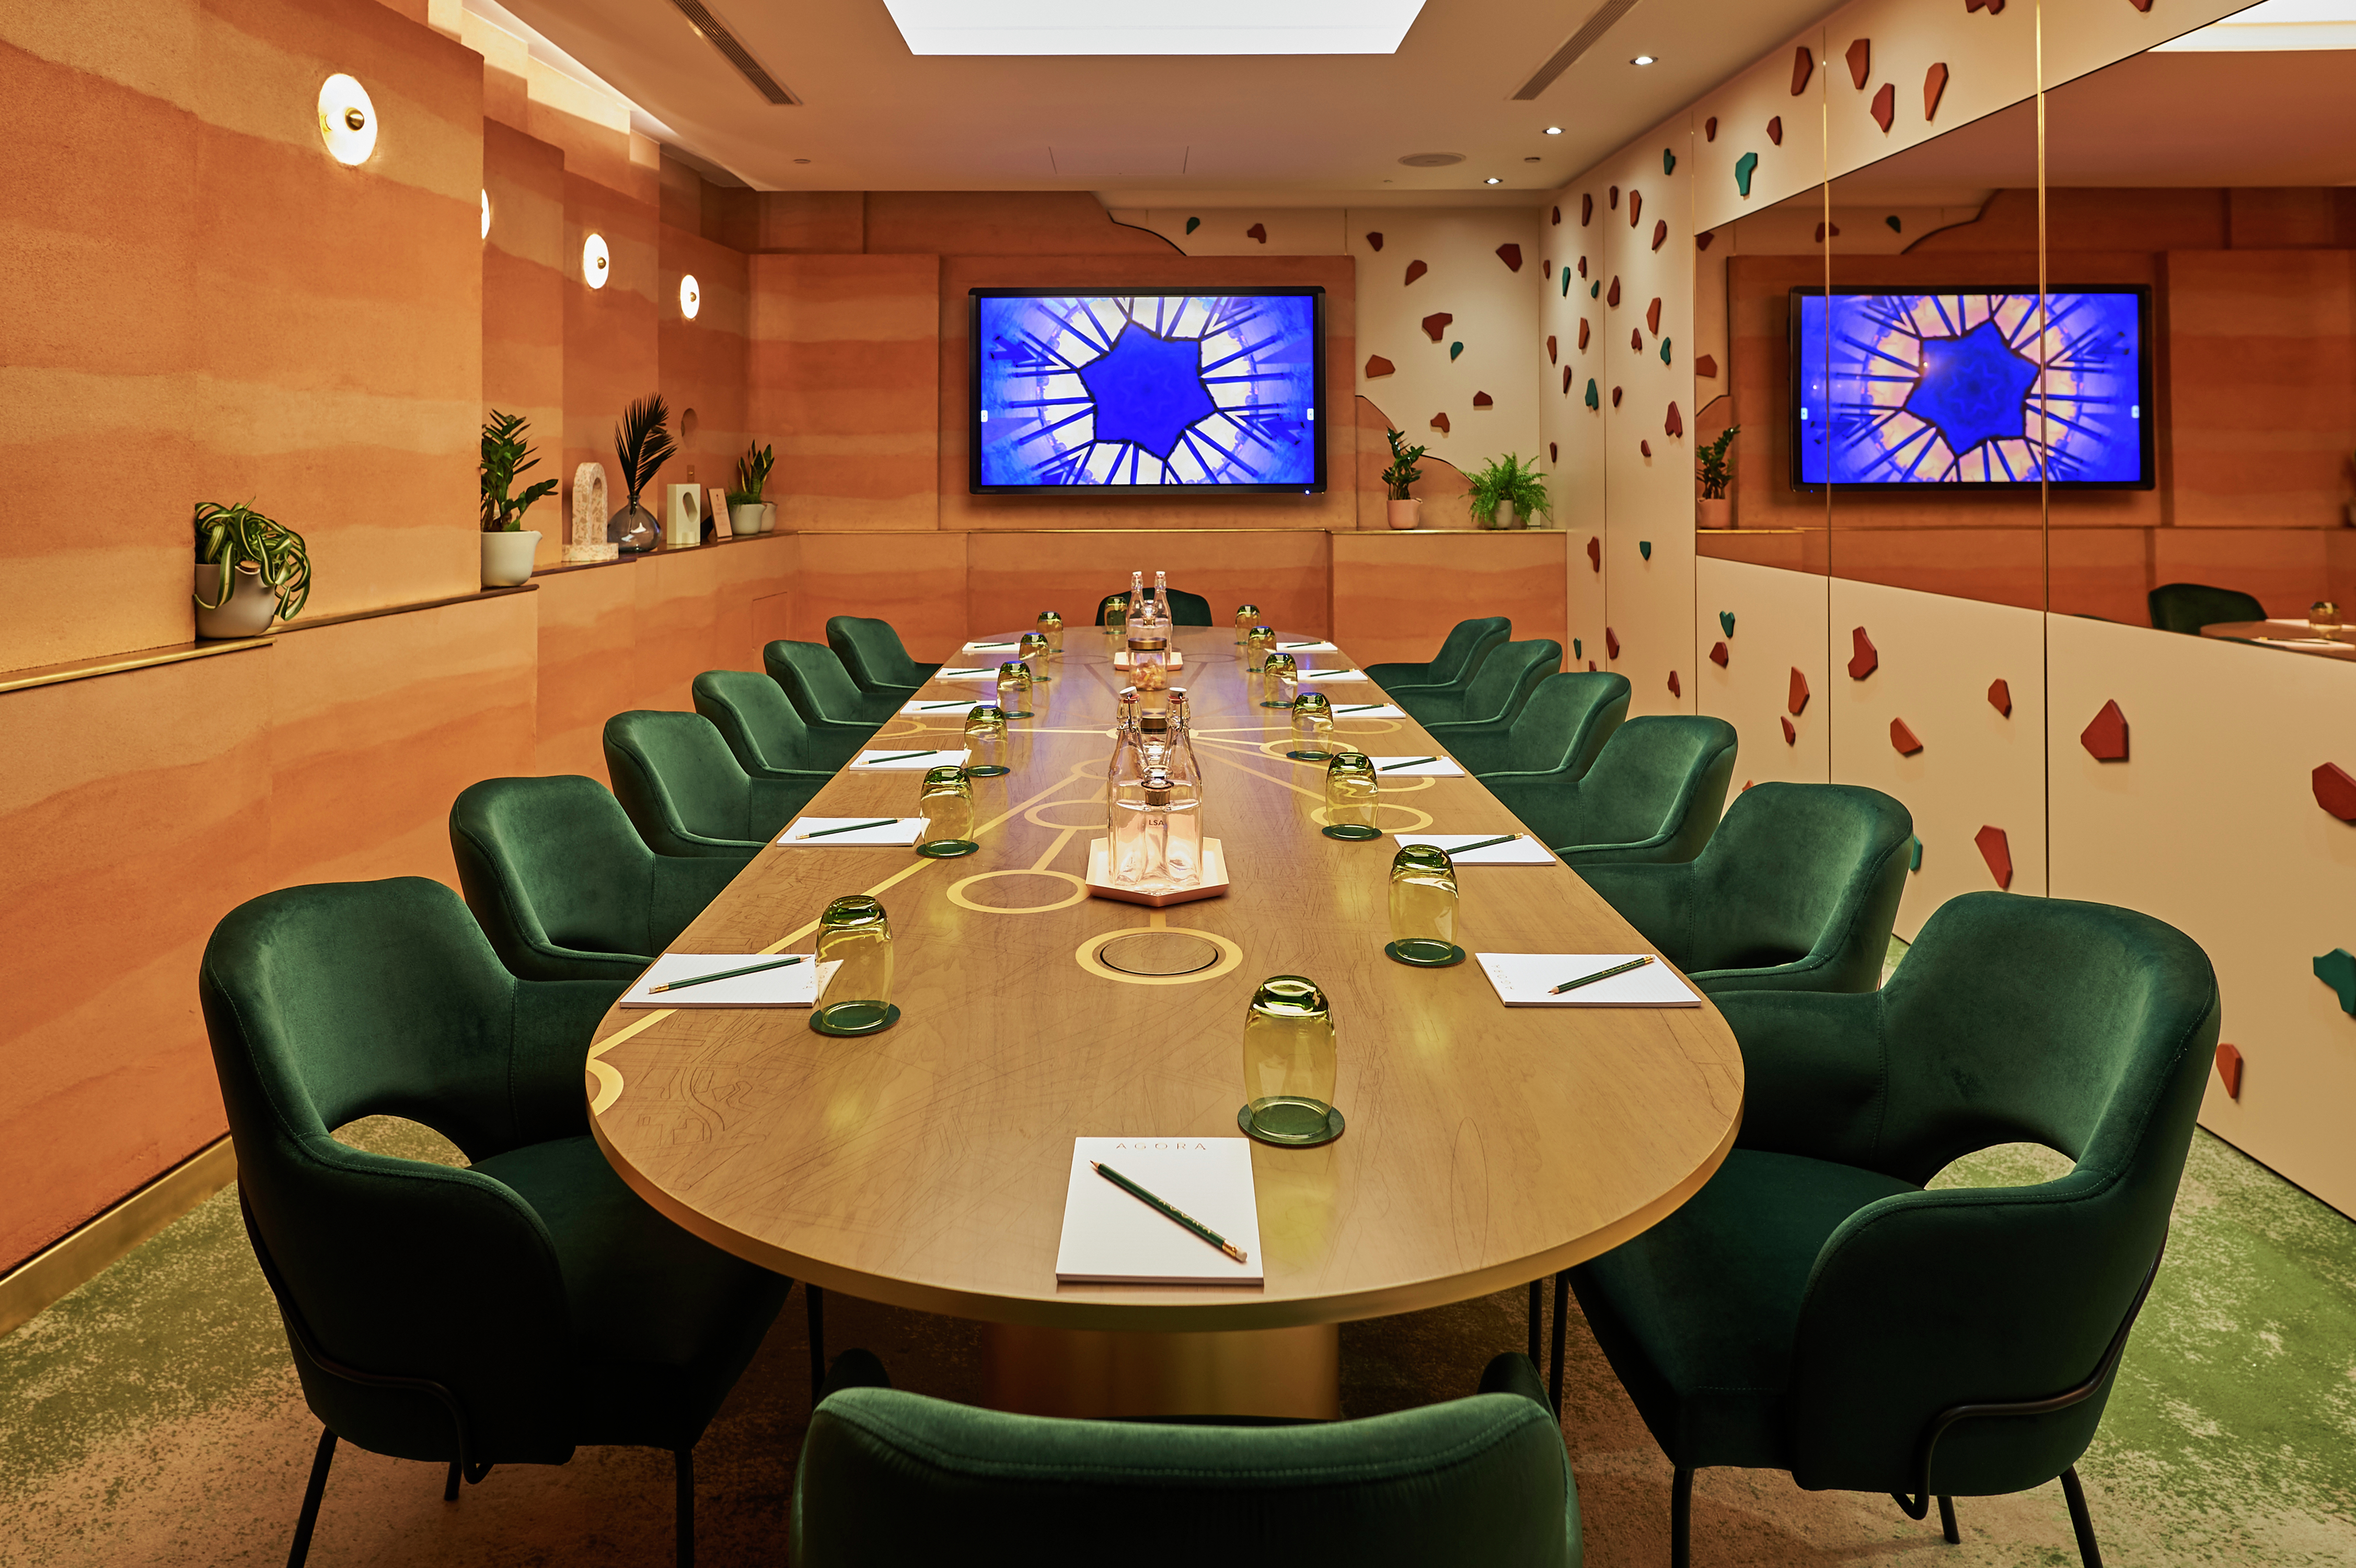 Agora meeting room with large table and 14 green chairs, distinct blue star wall art